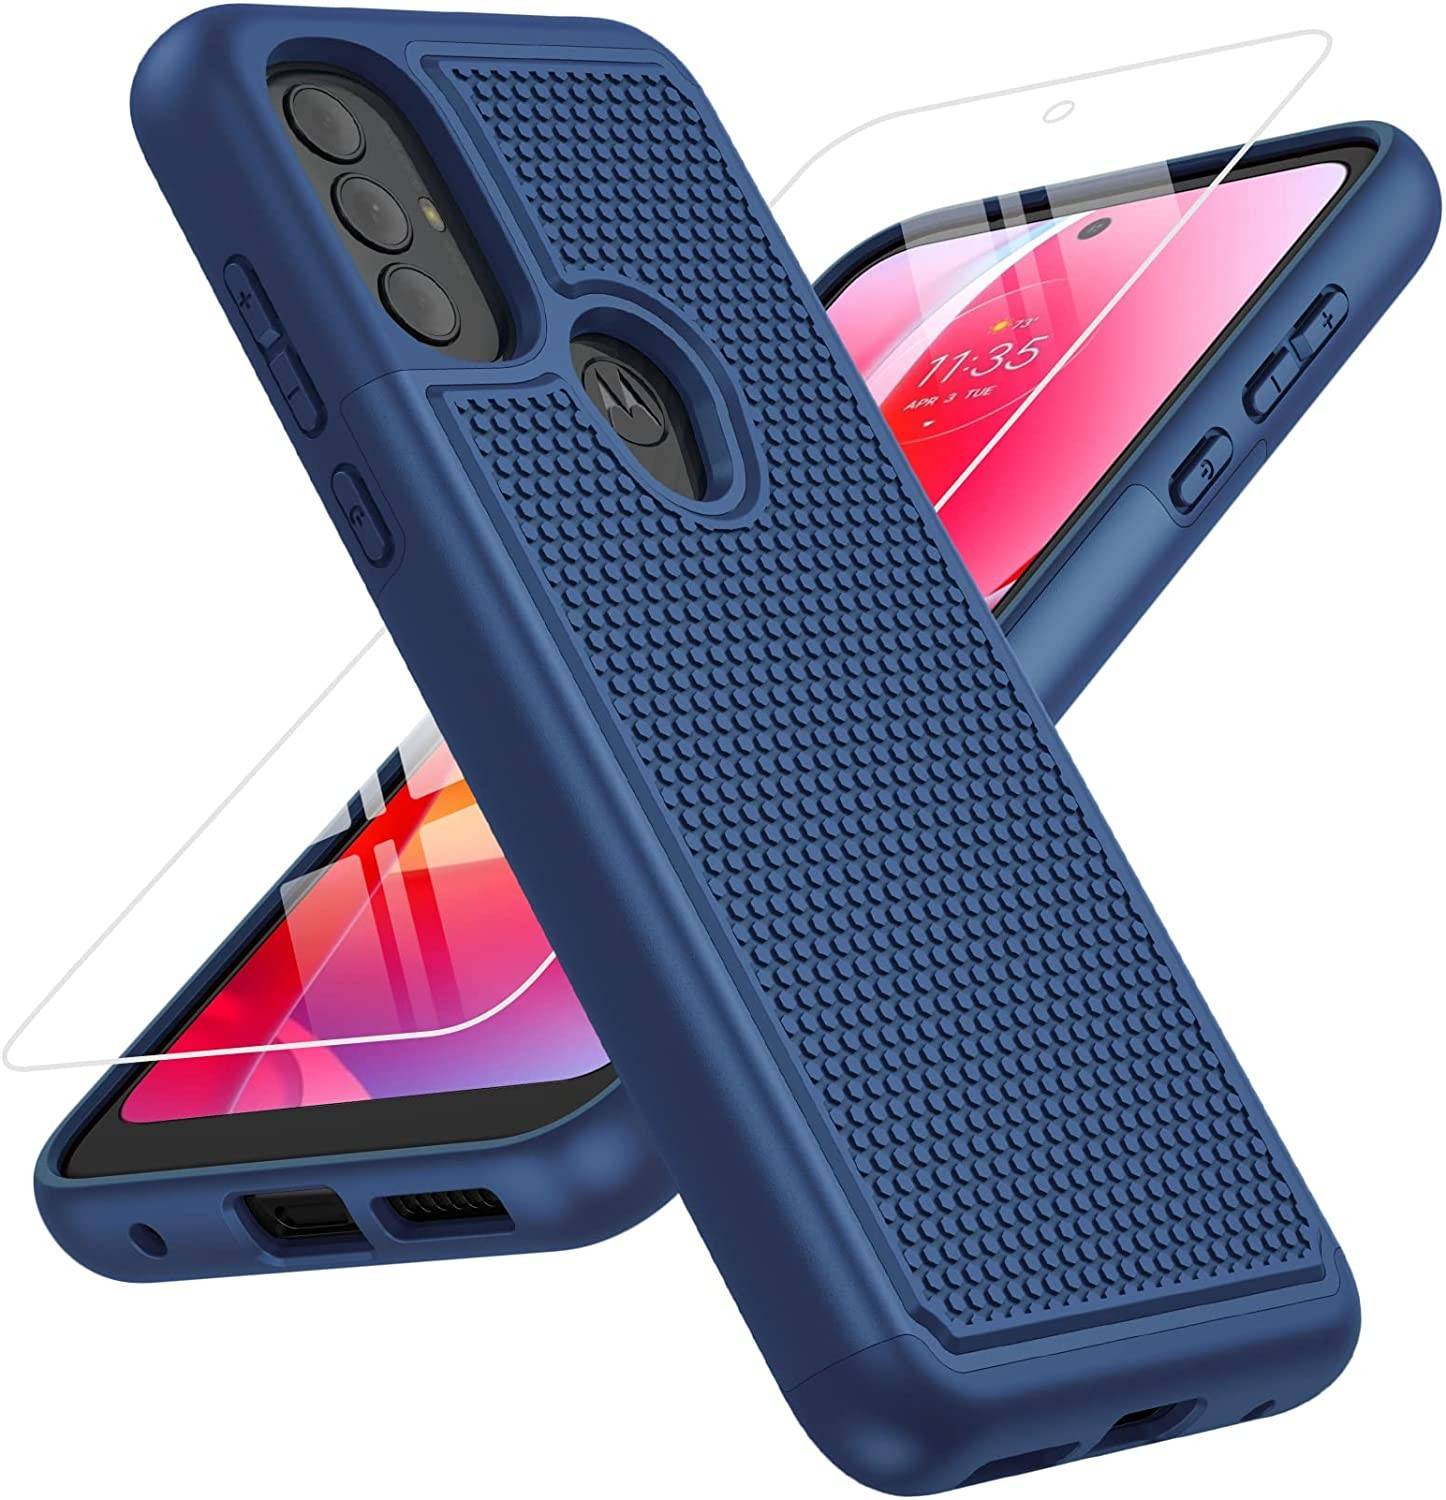 BNIUT Protective case for Moto G Power 2022